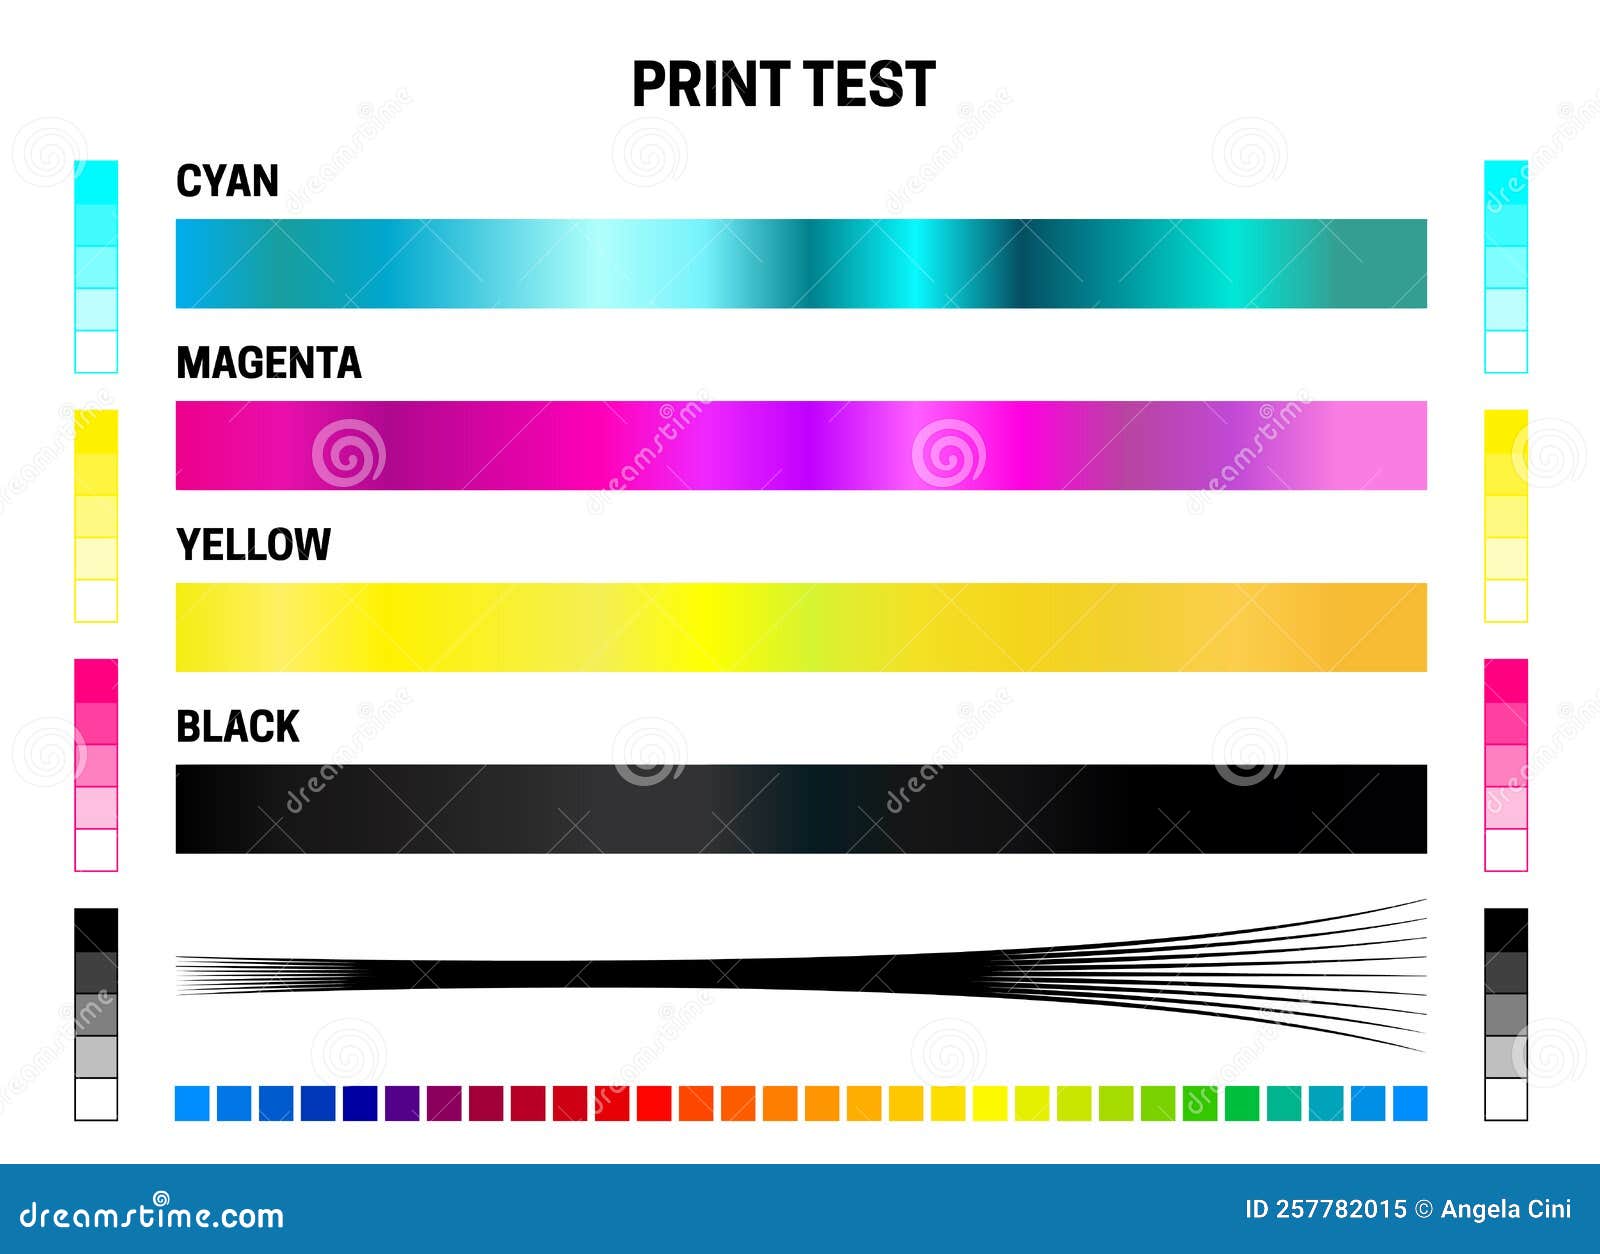 Print CMYK Calibration Illustration with Color Test for Cyan, Magenta, Yellow, Black and Many Colors Stock Vector - Illustration of layout, 257782015